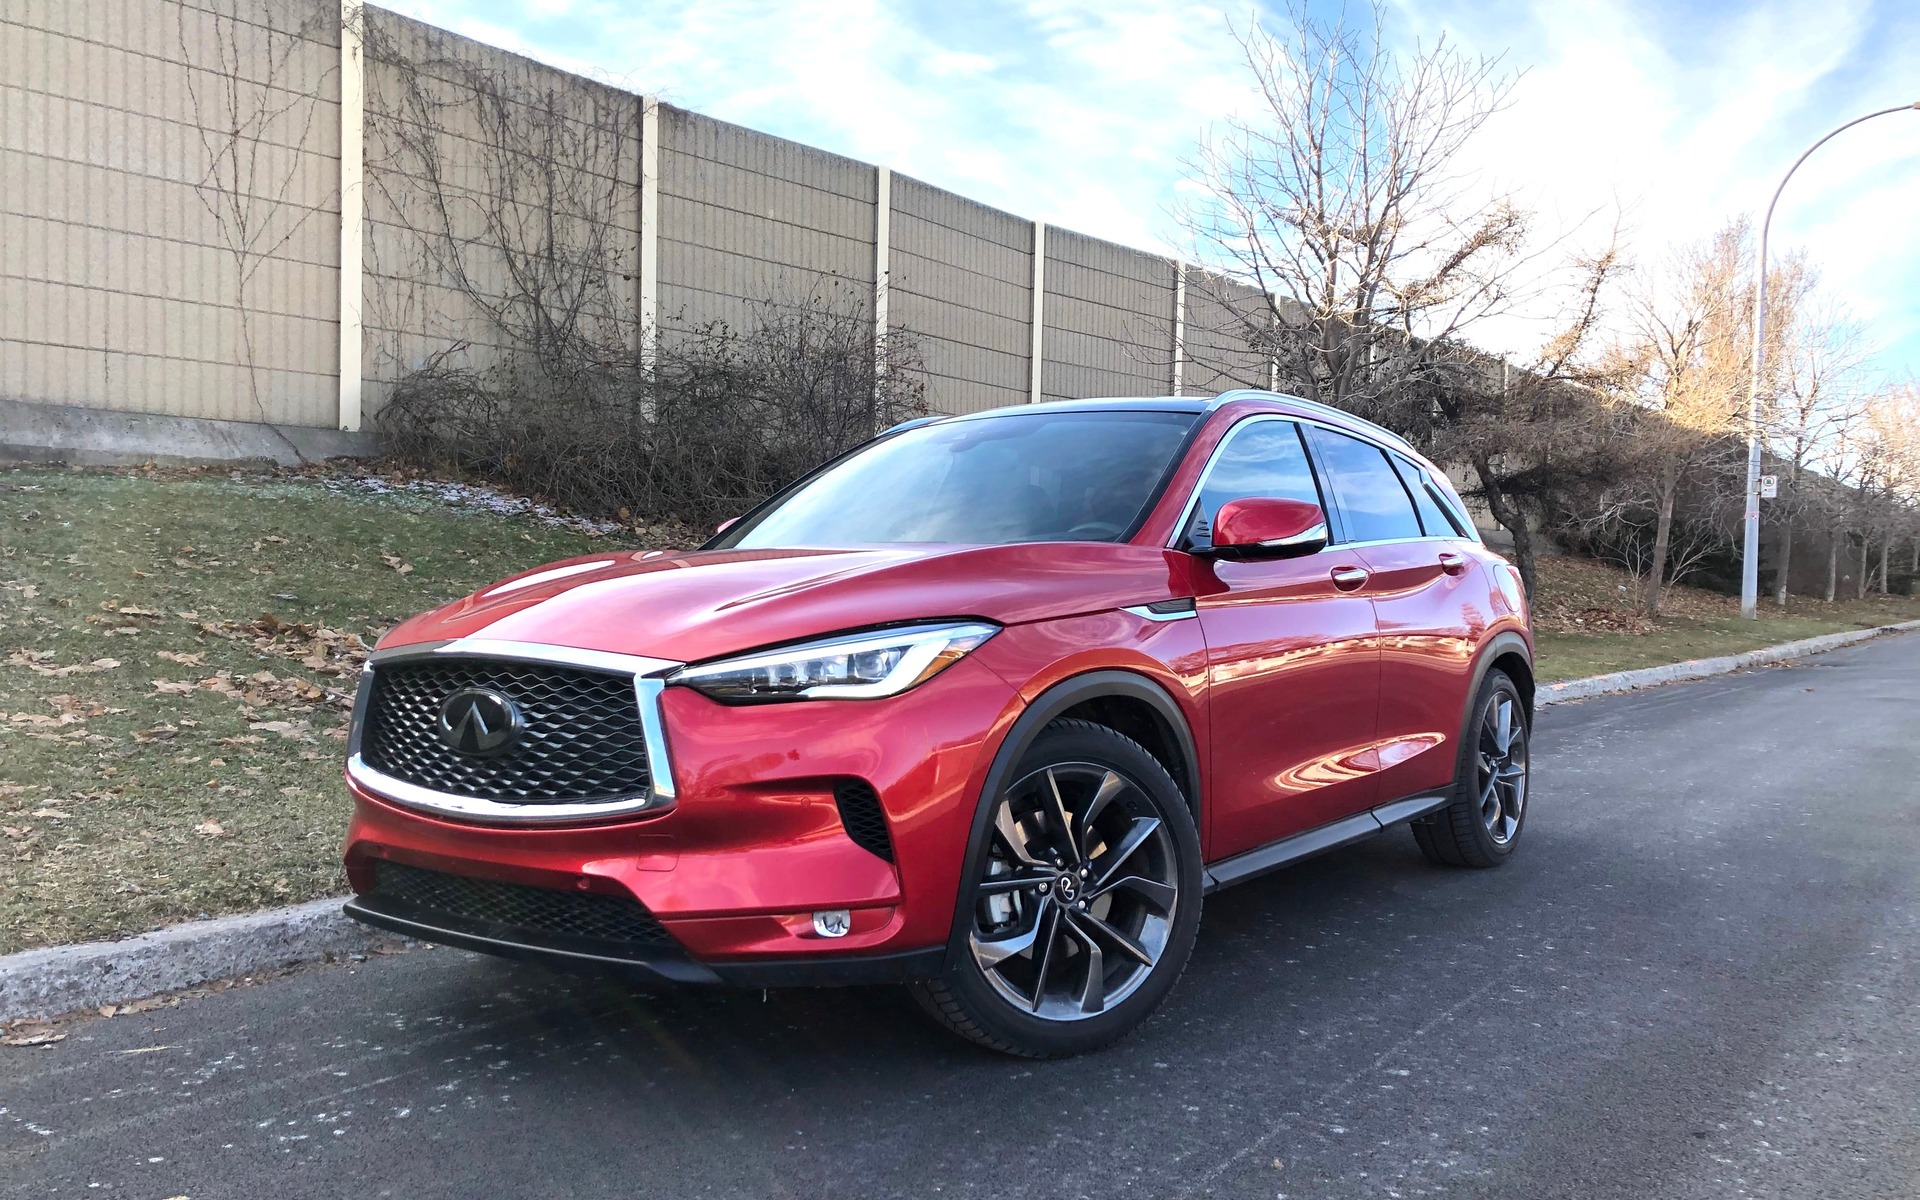 2020 Infiniti QX50: Unable to Rise to the Challenge - The Car Guide